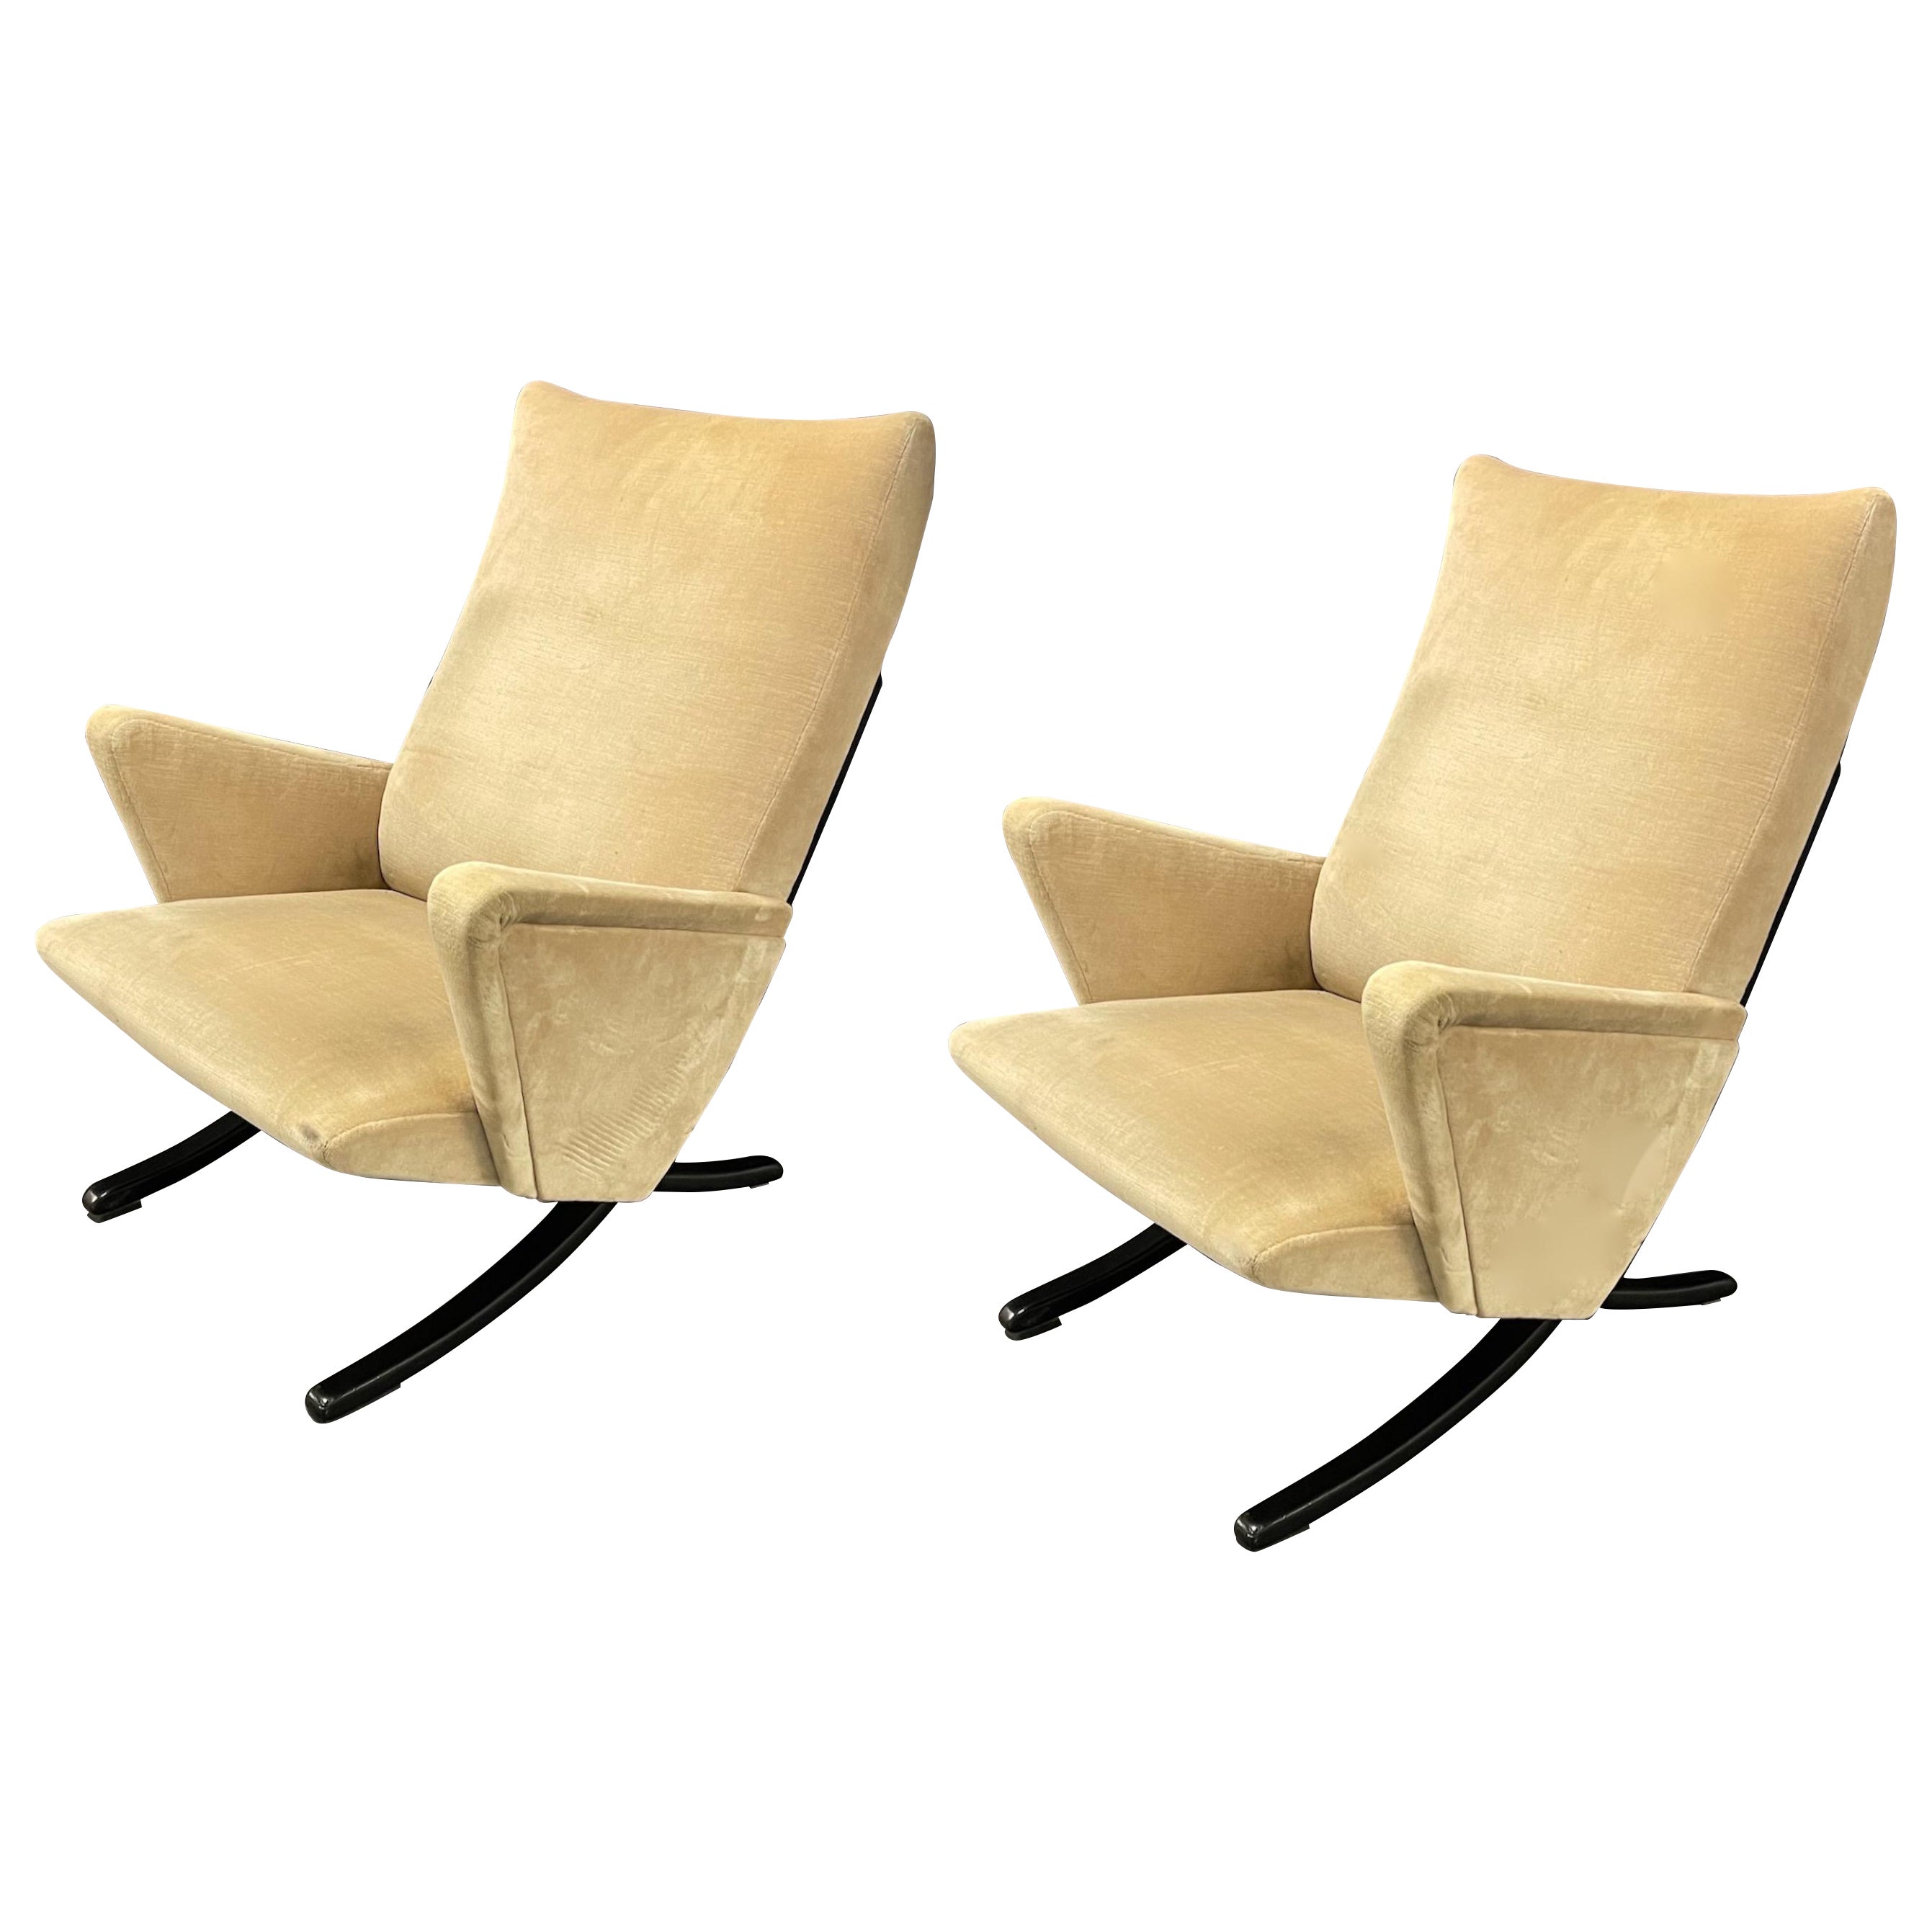 Exceptionally Rare Set of 2 Lounge Chairs by Arnold Bode For Sale